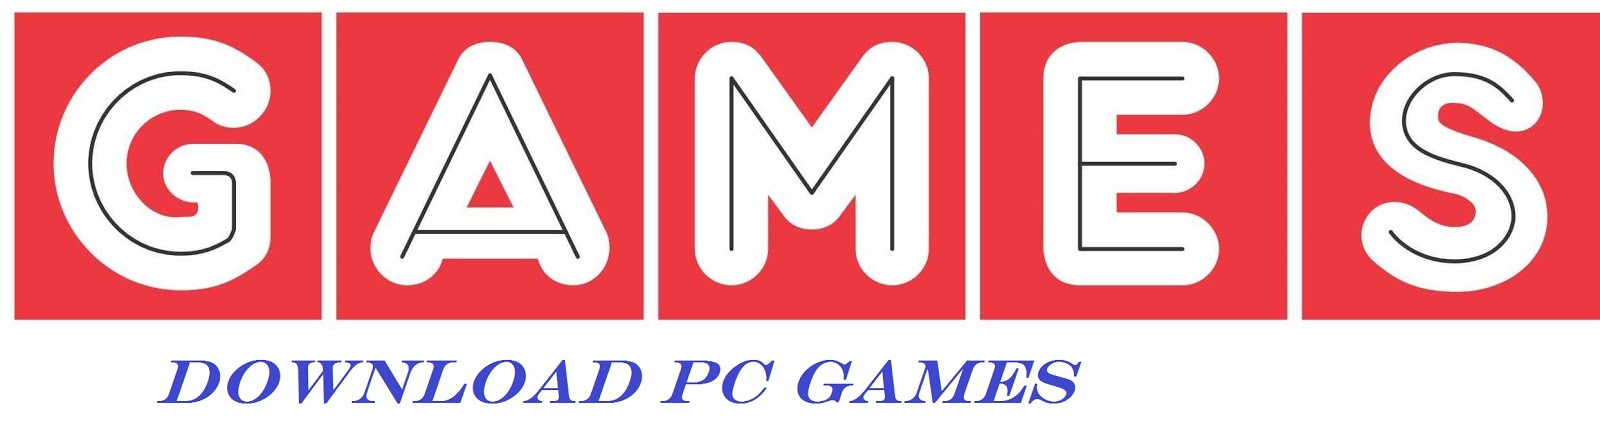 Download PC Games